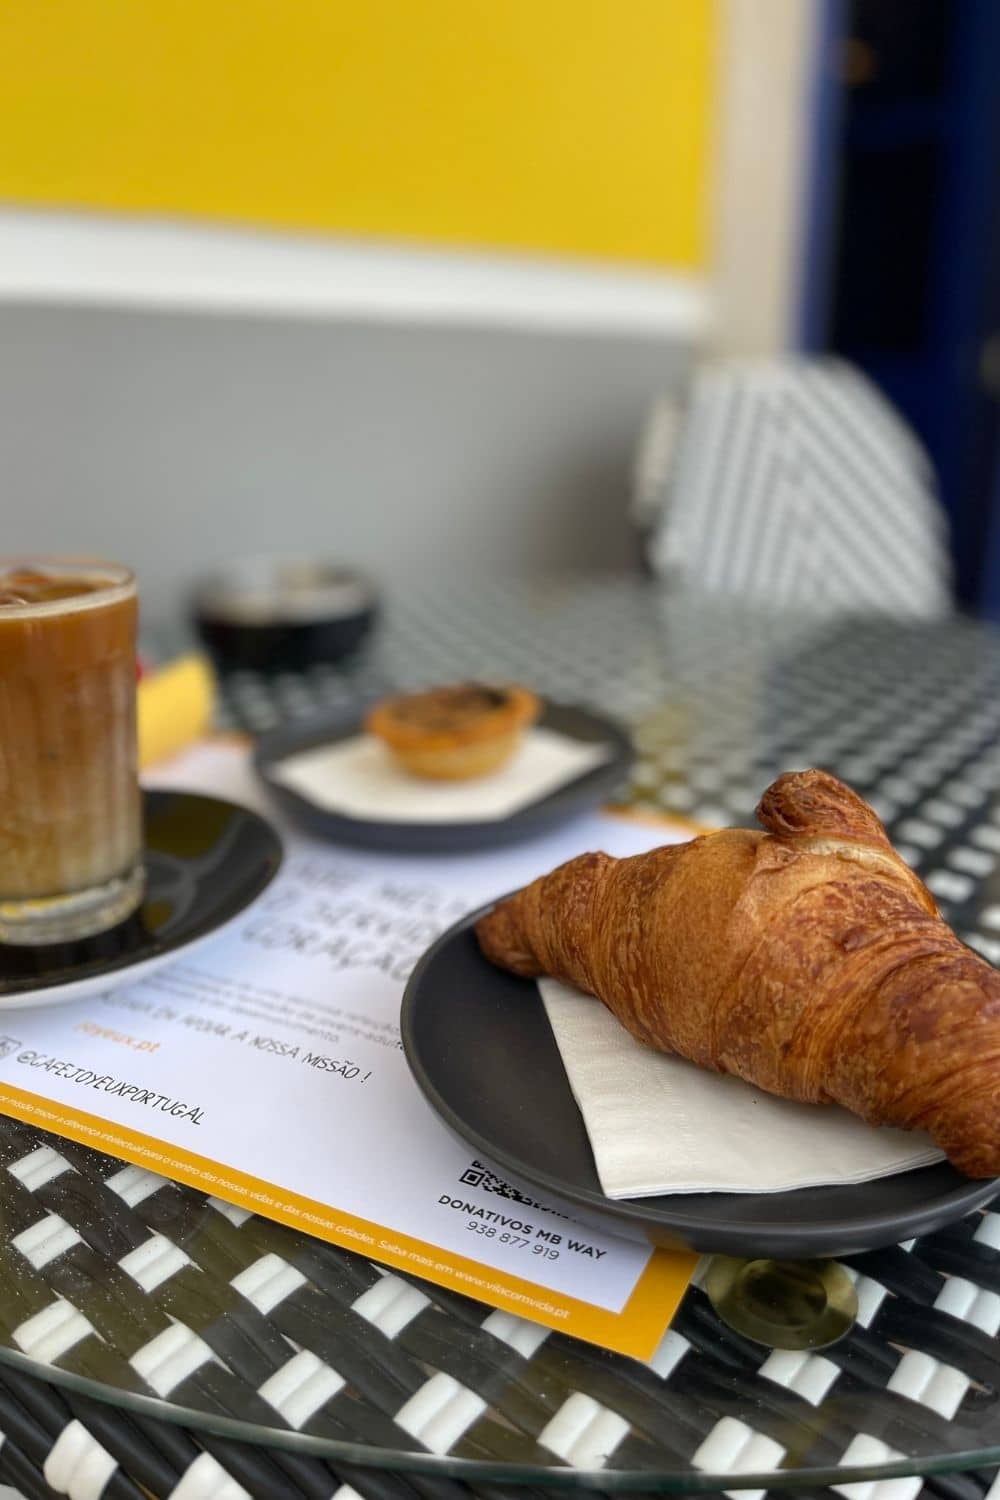 A table with a blurred background emphasizes the items in the foreground: a glass of iced coffee, a pastel de nata on a plate, and a fresh croissant. The focus on the delicious snacks and the use of a narrow depth of field suggest a casual, enjoyable moment, likely part of a leisurely café experience.